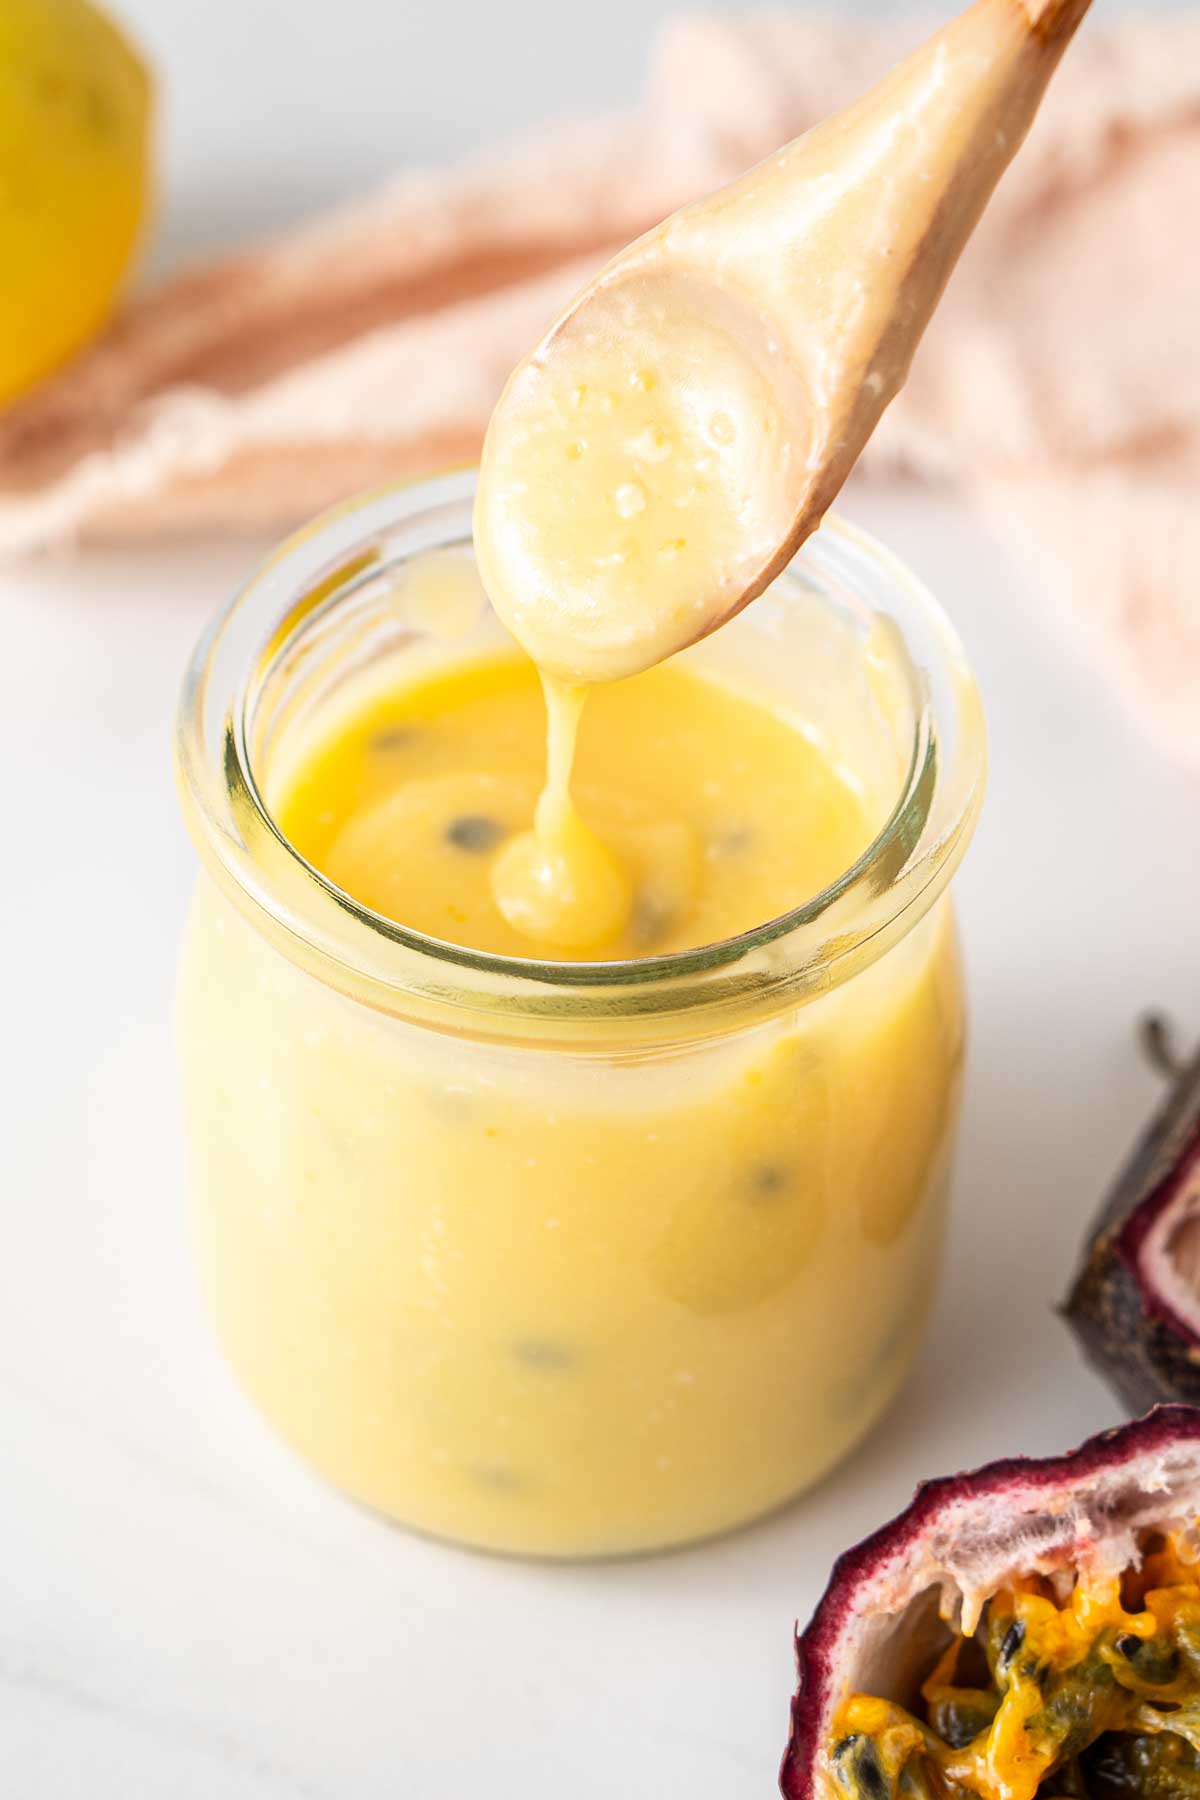 Passionfruit and lemon curd in a jar being drizzled with a spoon.